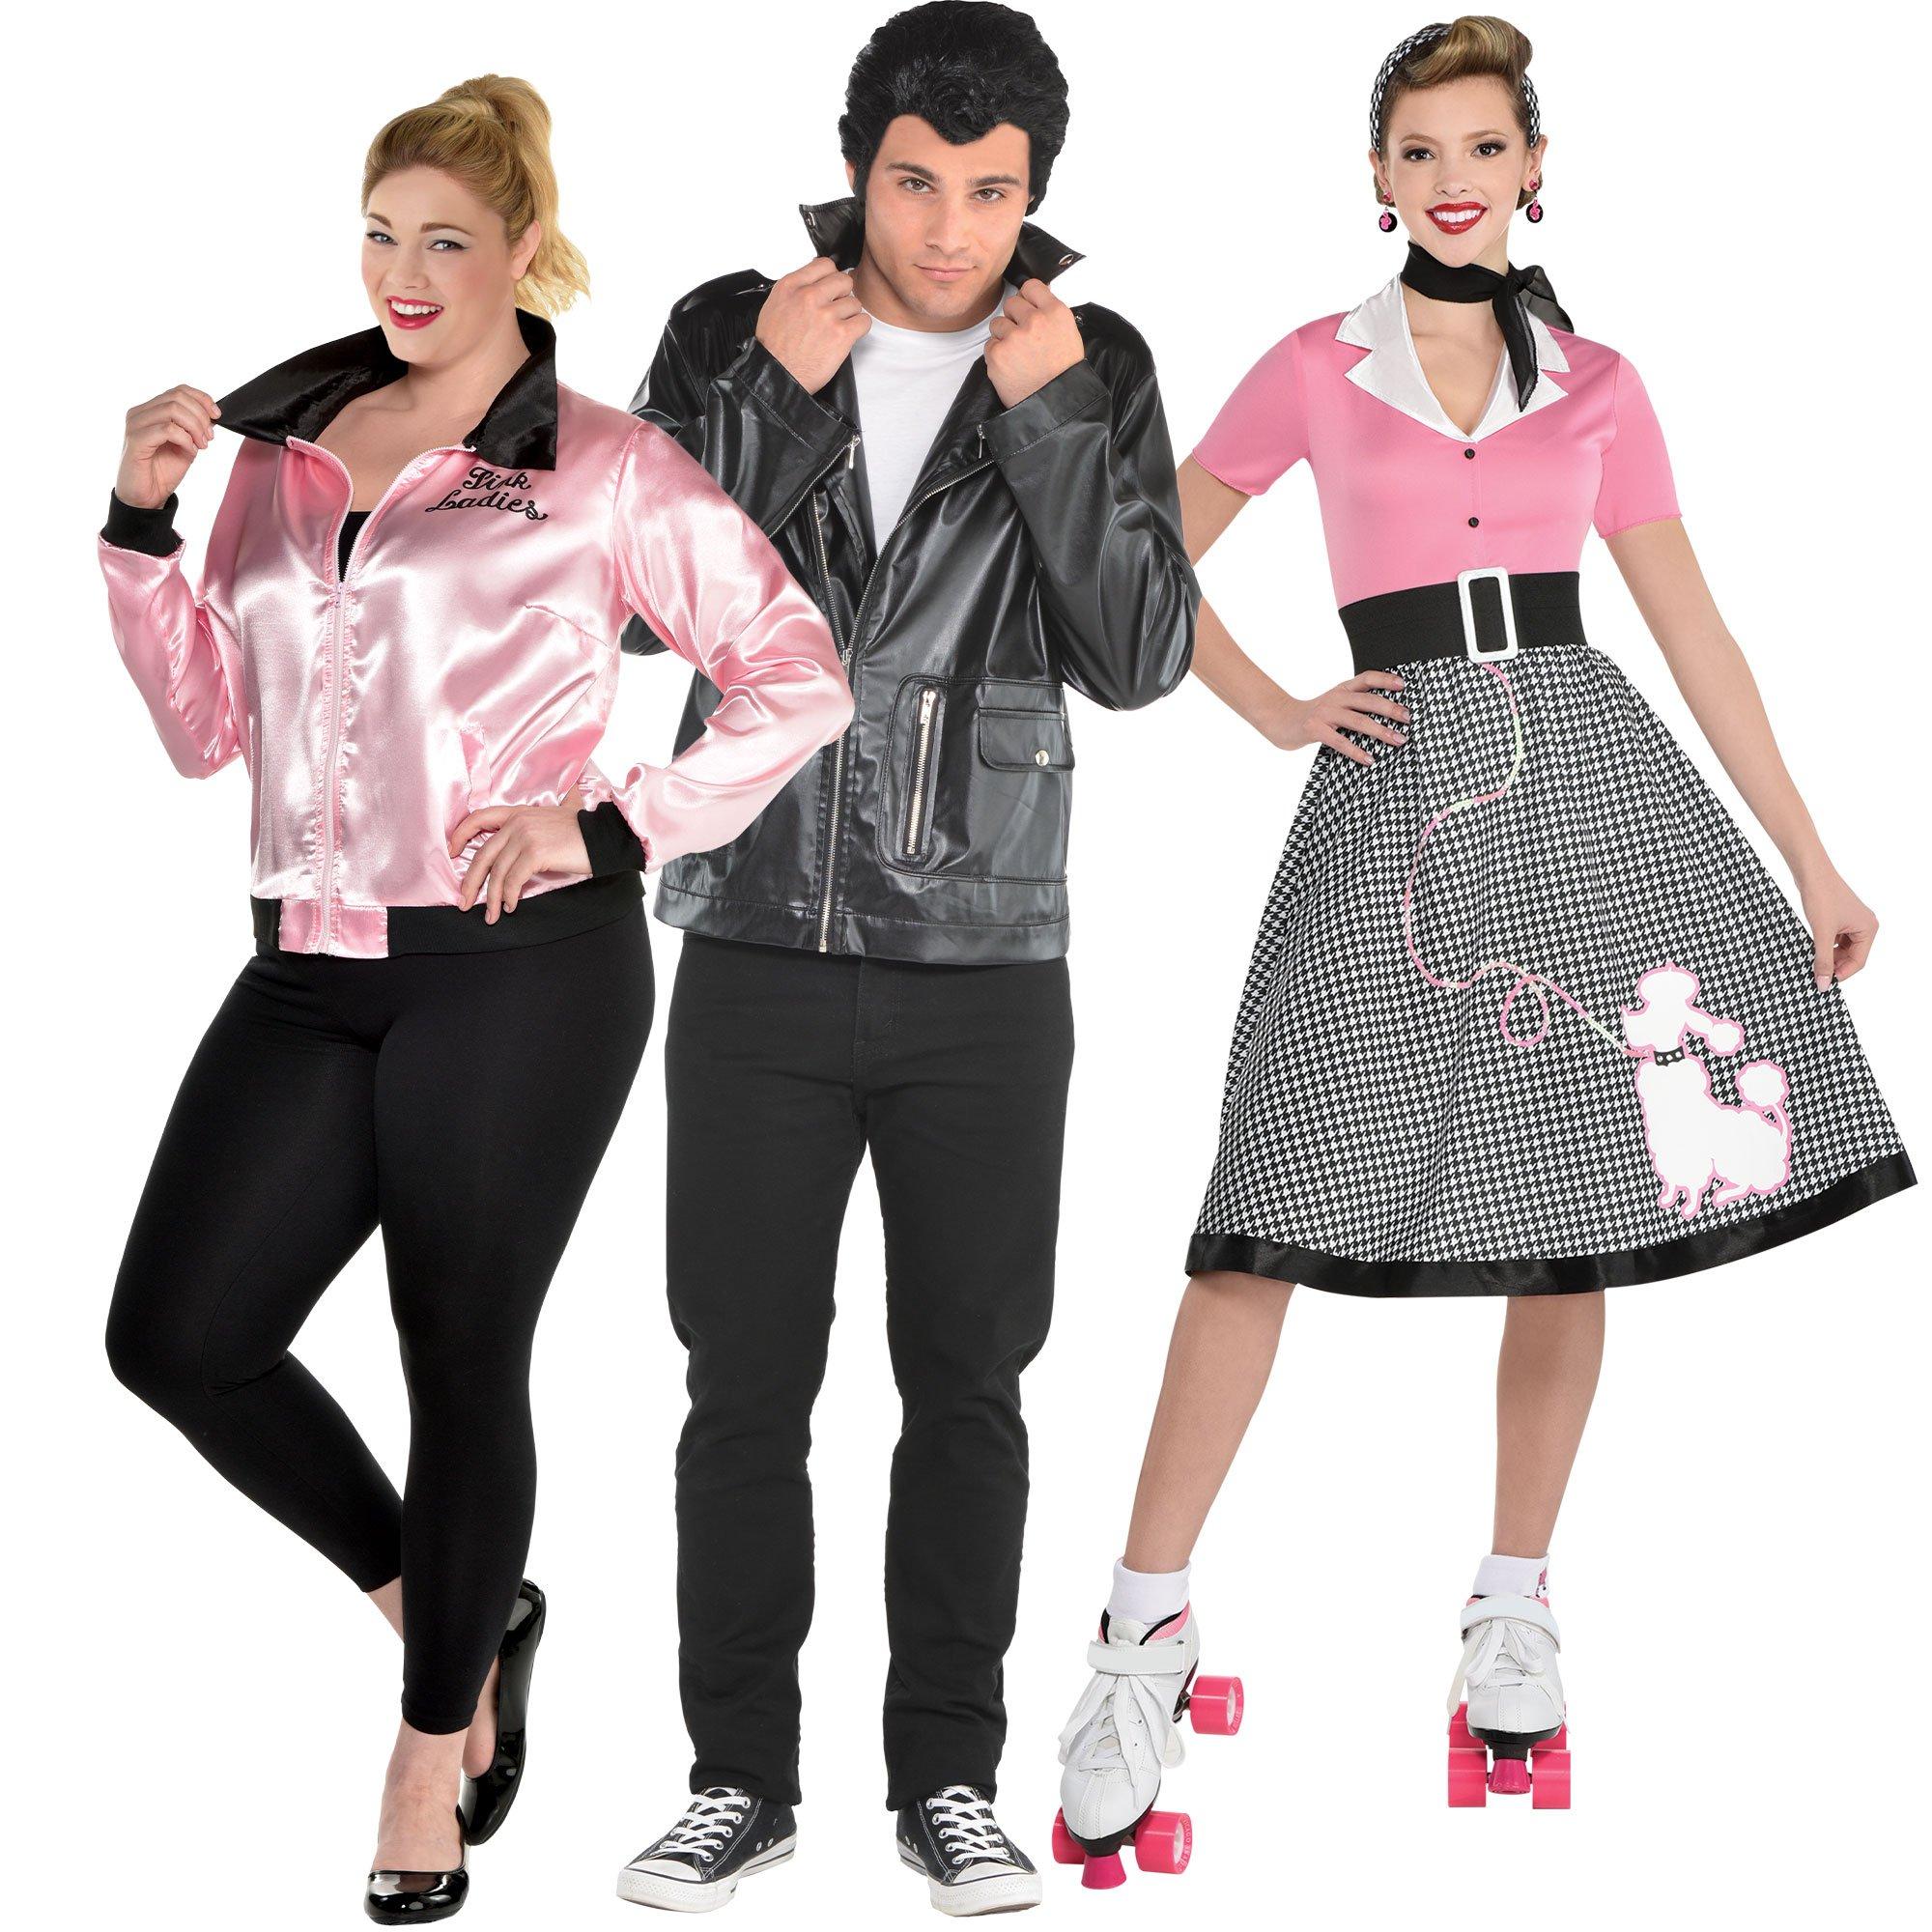  FAYBOX Pink Ladies Jacket Grease 50s Costume for Women  Girls,Halloween Costumes 1950s Party Outfits Accessories for Adults :  Clothing, Shoes & Jewelry